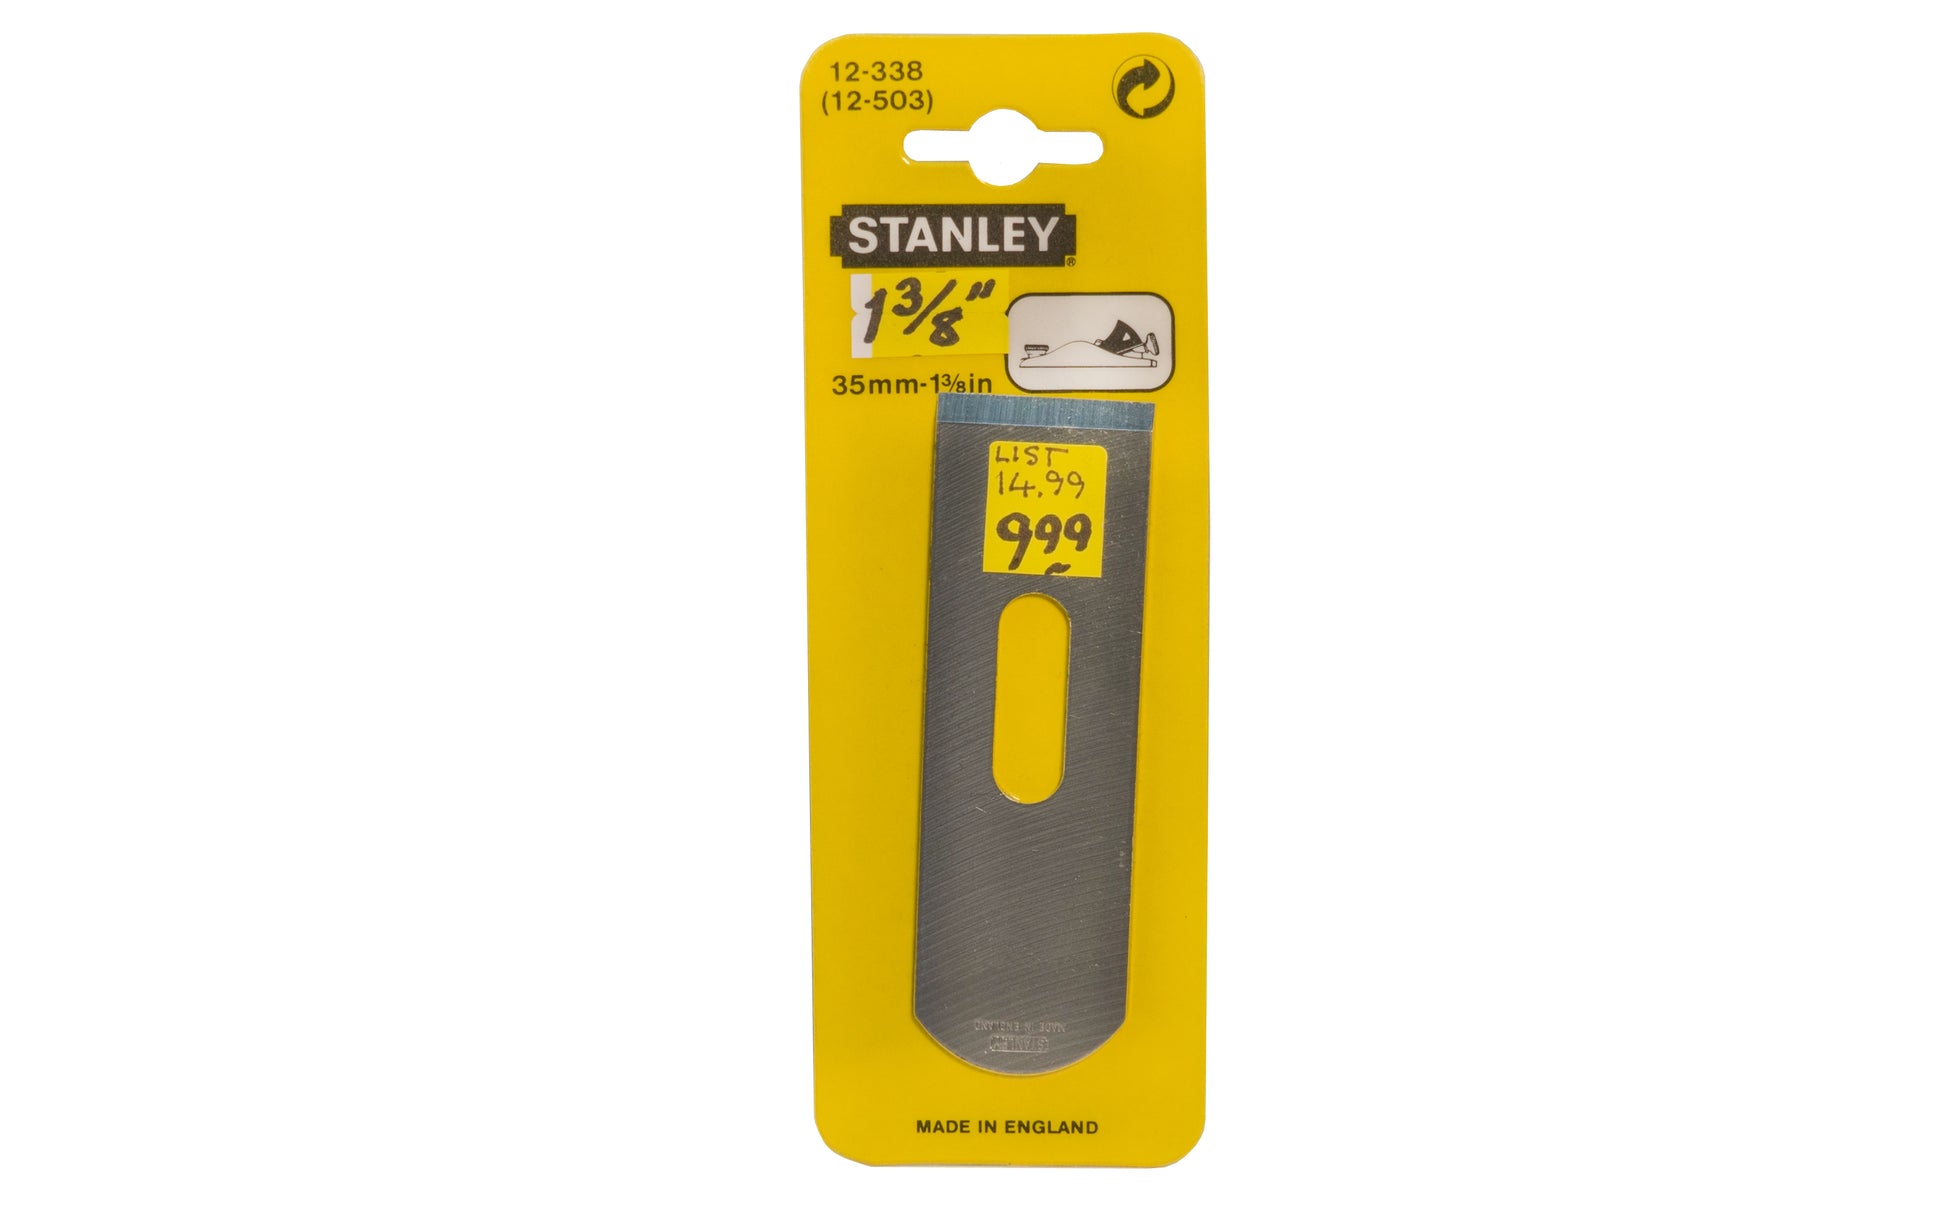 Model 12-503  12-503 ~ 1-3/8" (35 mm) wide cutter blade ~ Hardened, tempered high-carbon chrome steel gives excellent edge retention - Can be honed to a razor-sharp edge ~ Ground to a flat surface ~ Ground edge of 25°; finish with honed angle of 30° is recommended - 076174123388 - Replacement Stanley Iron Blade